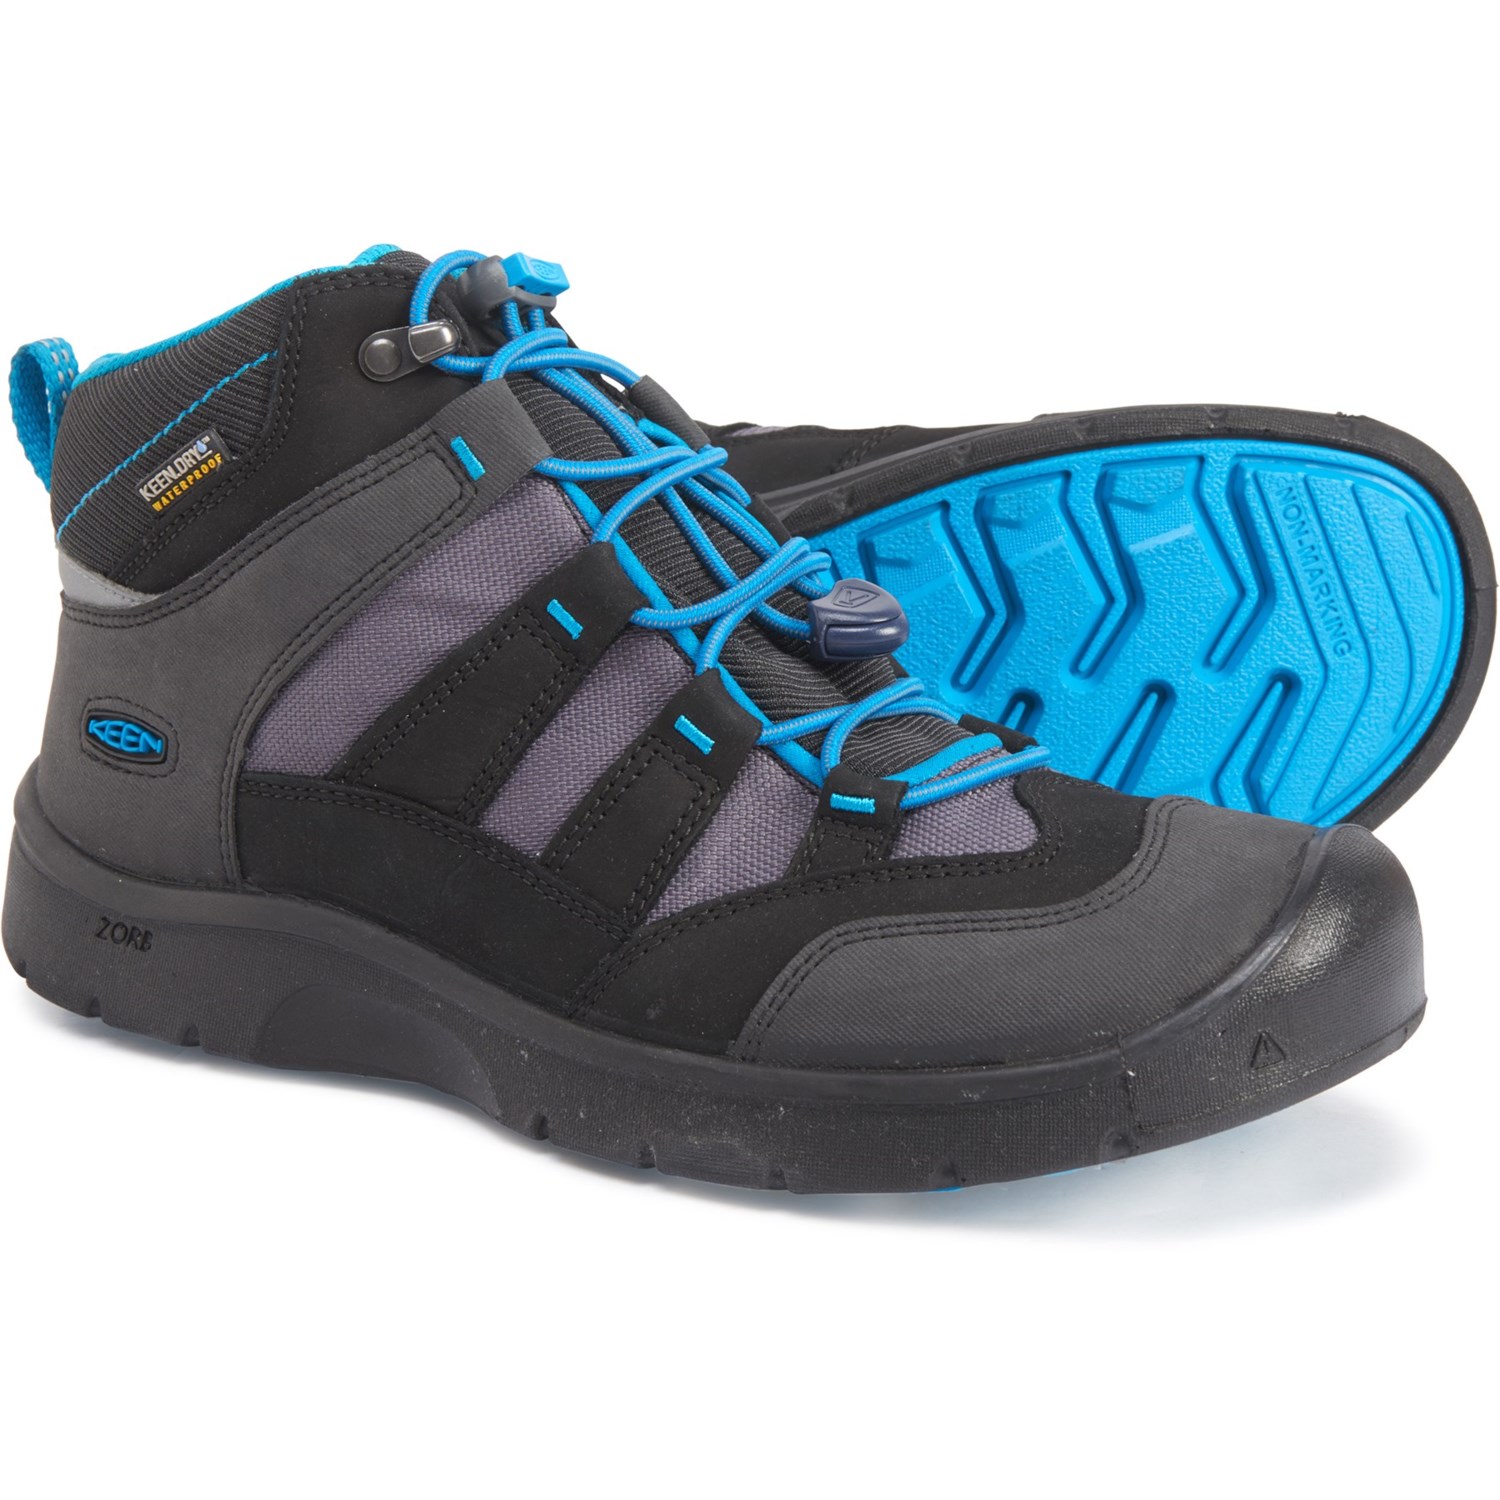 KEEN Pagosa Mid WP Shoe Toddler/Little Kid 